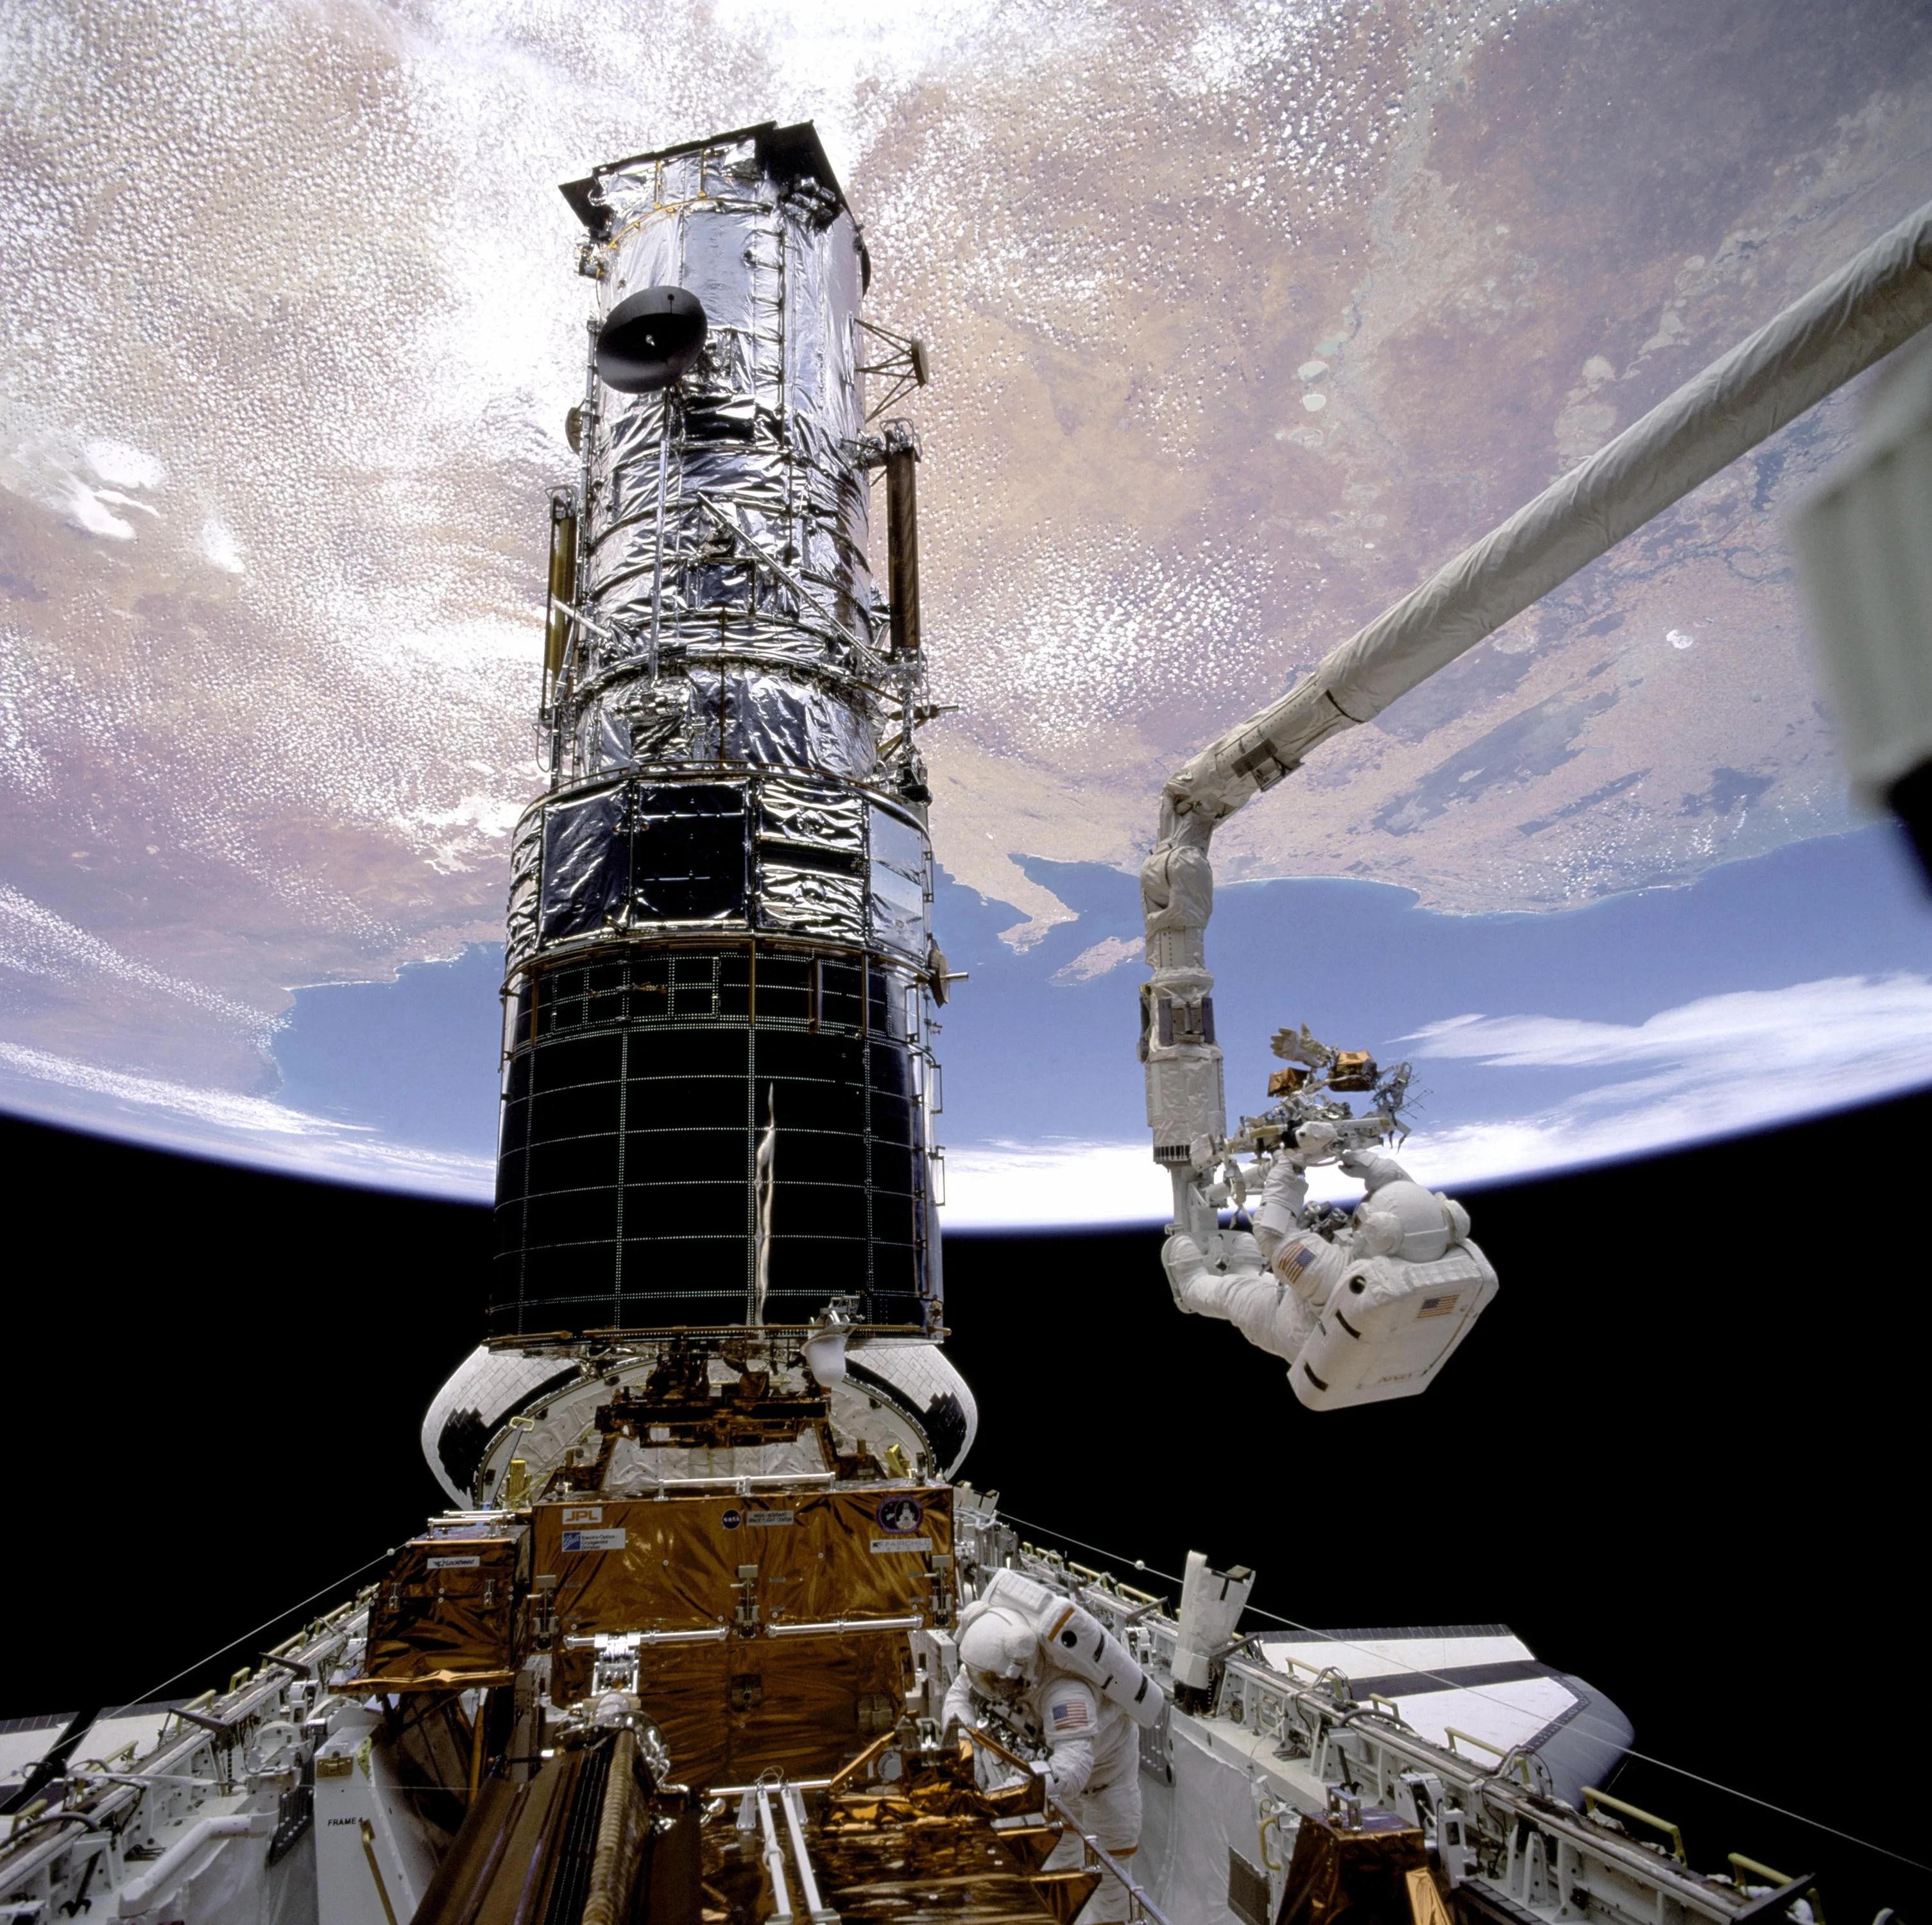 Hubble telescope undergoing astronaut repairs on first servicing mission